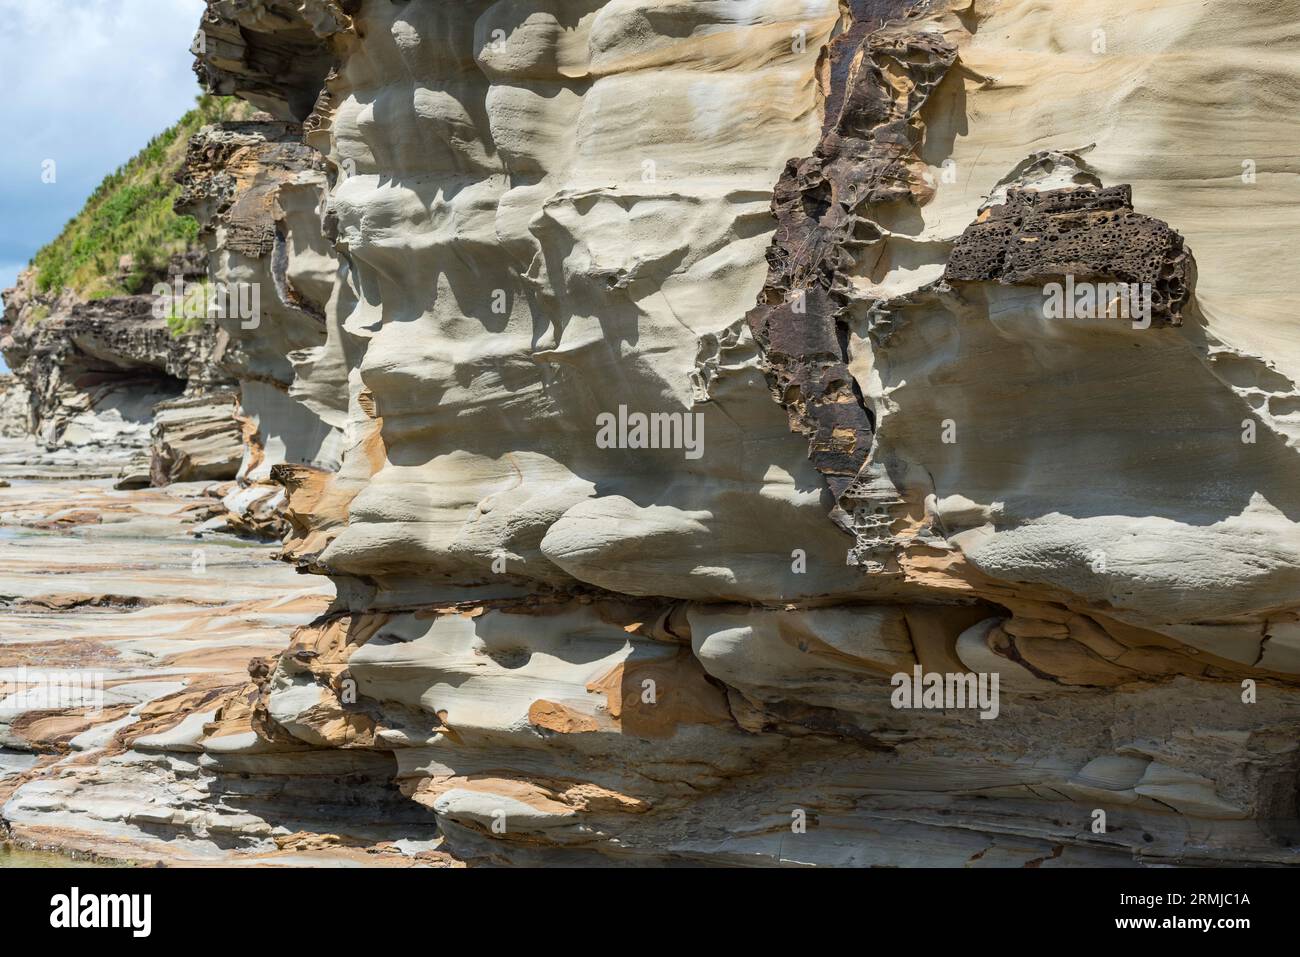 A Hawkesbury Sandstone rock wall and platform at the southern end of Avoca Beach, weathered and worn by constant ocean tides, wind, rain and salt. Stock Photo